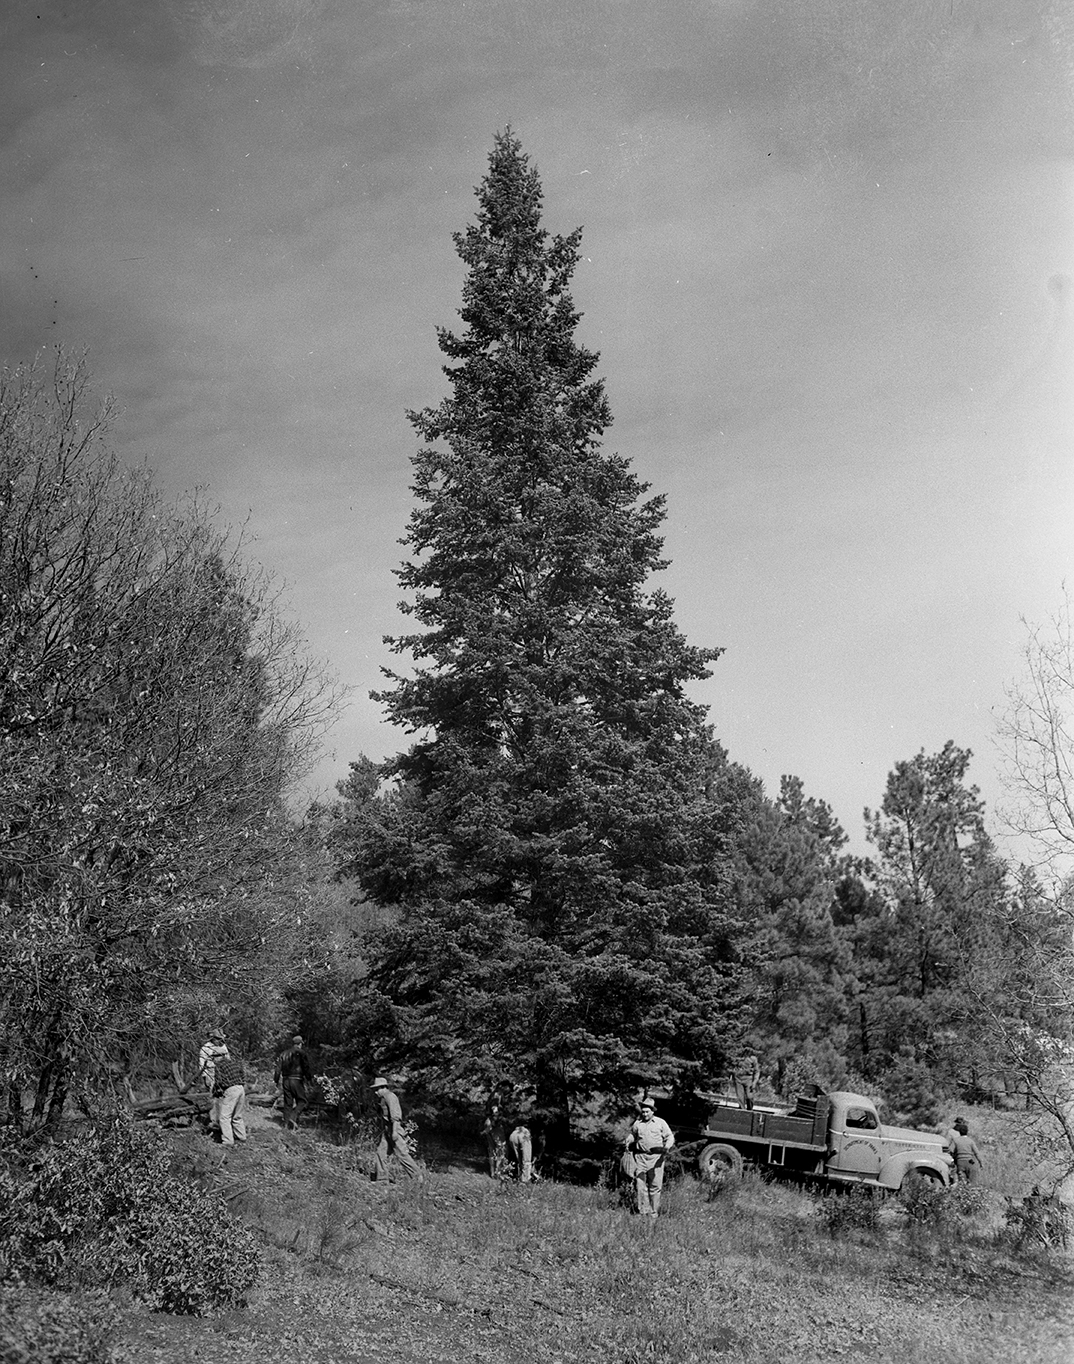 Huge fir tree preparing to be cut down to use as Fort Worth's Christmas Tree.